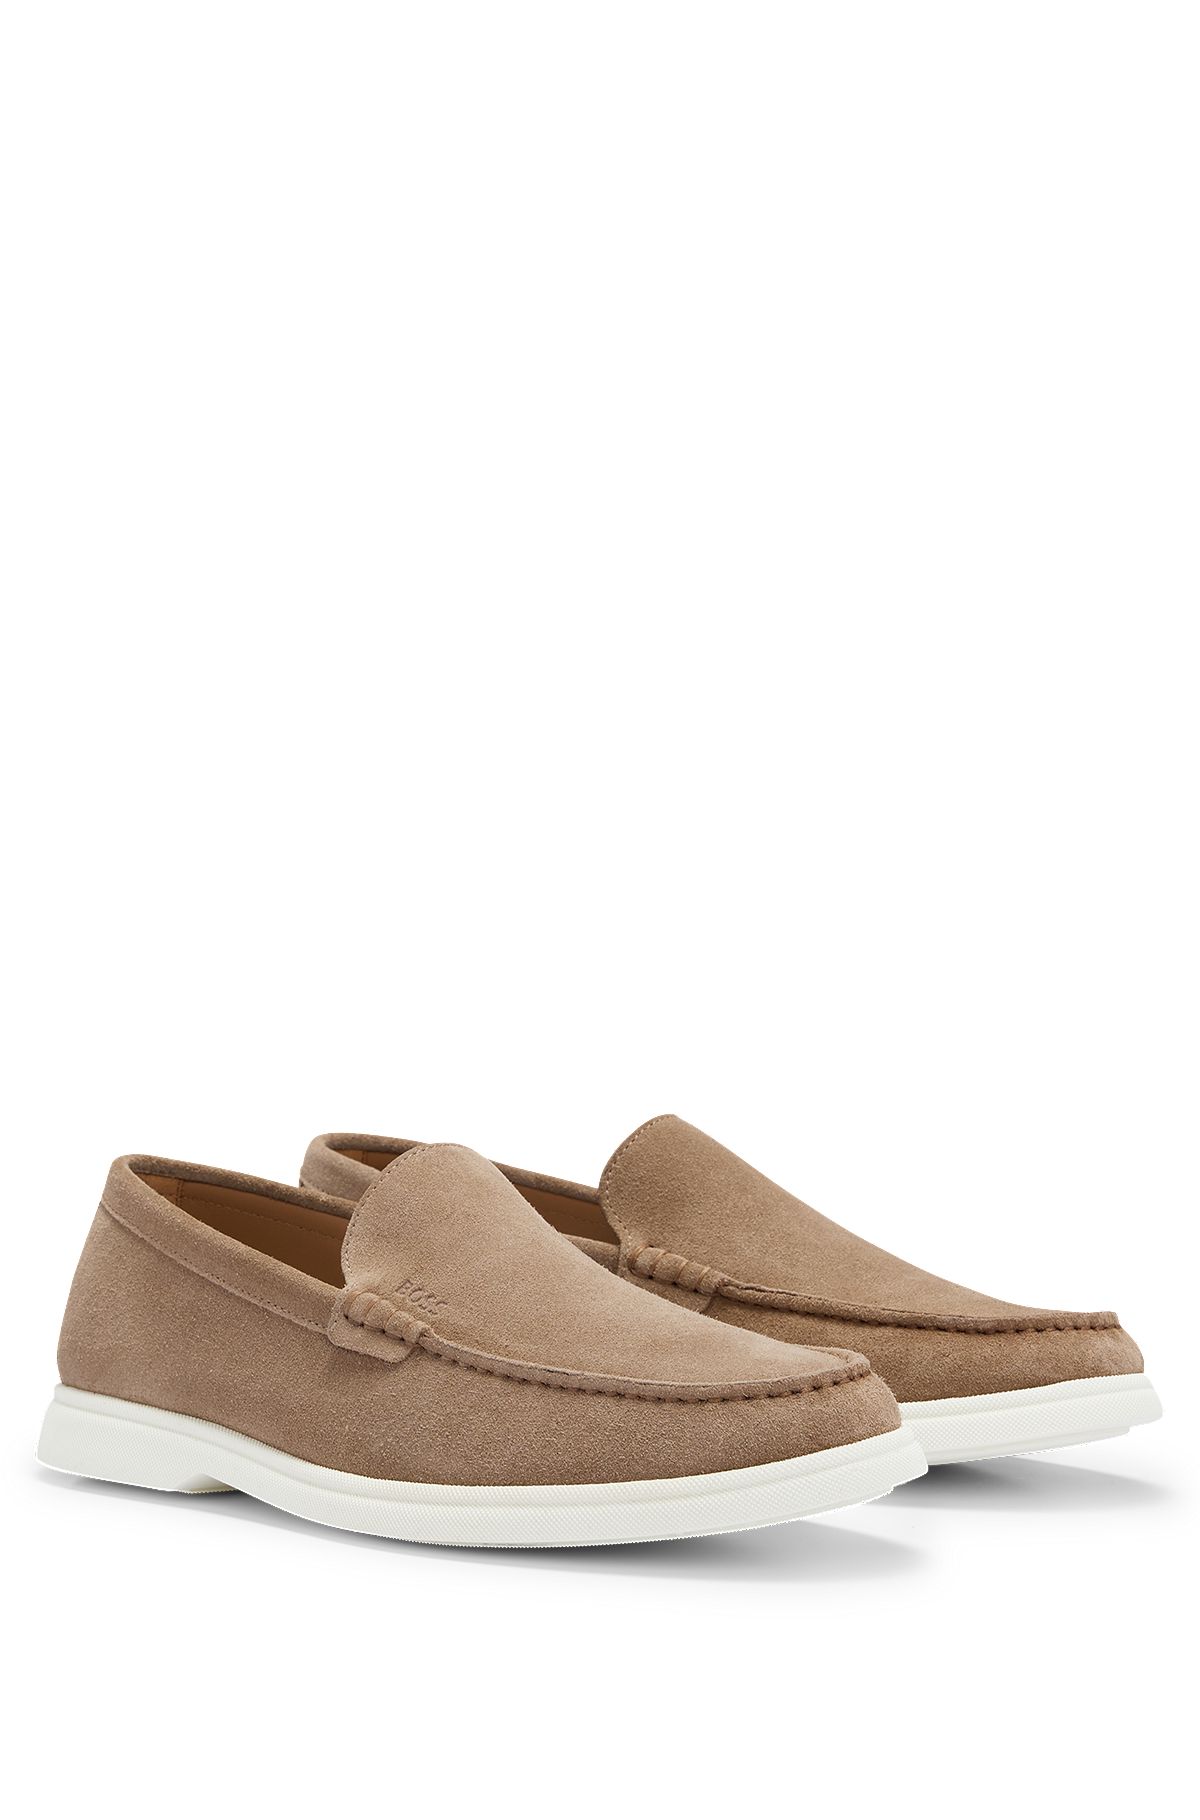 Suede loafers with embossed logo and TPU outsole, Beige